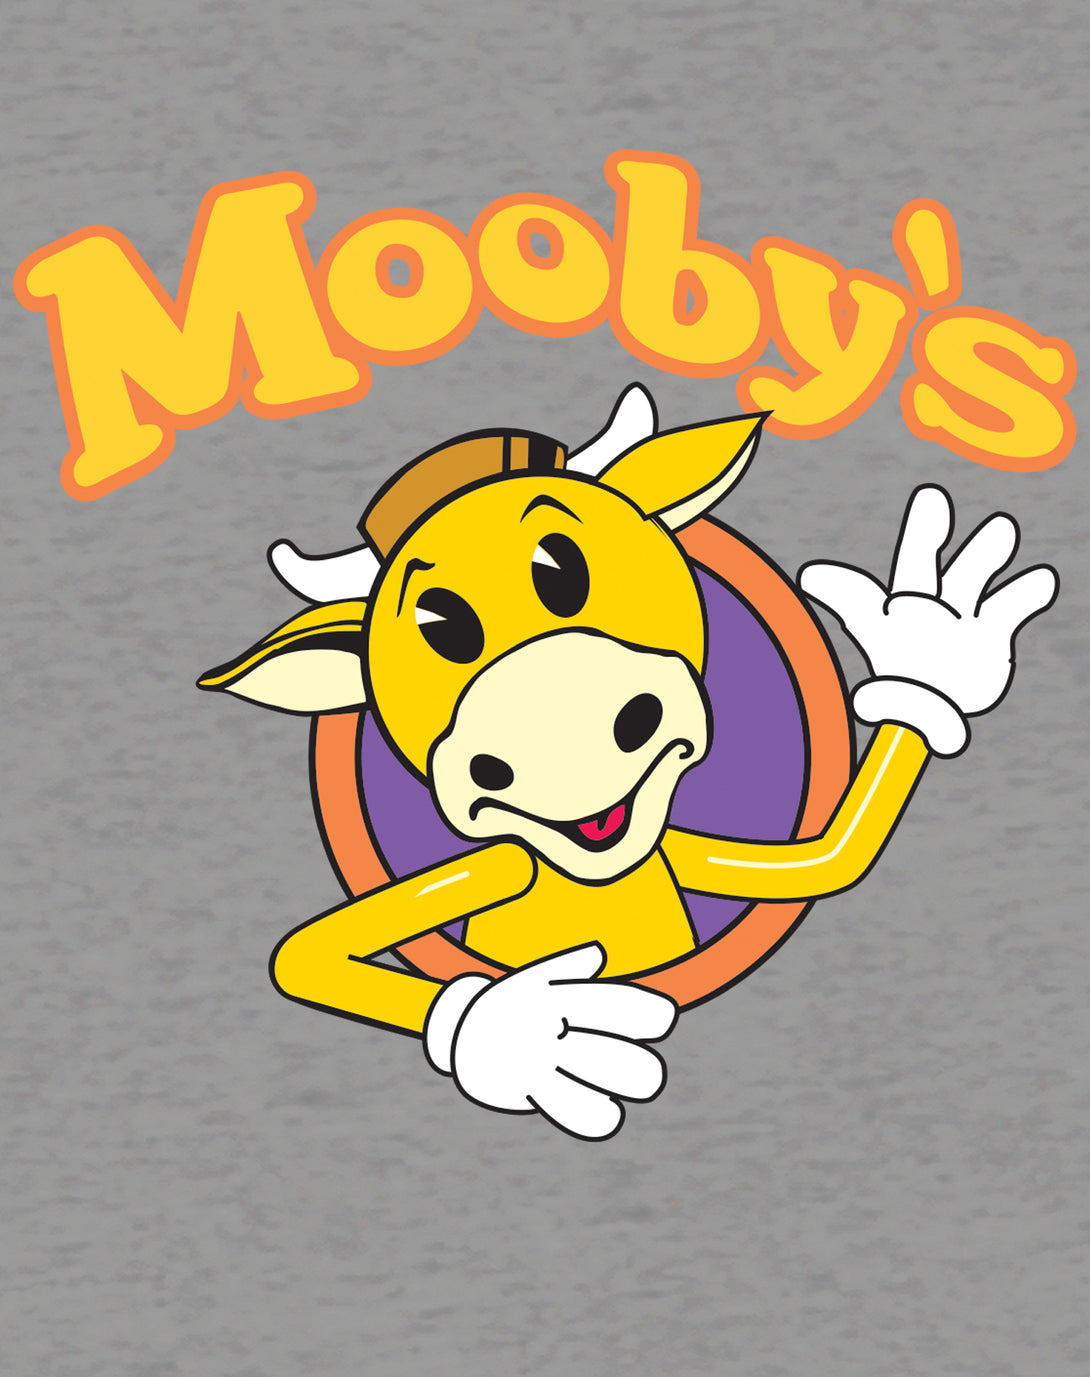 Kevin Smith View Askewniverse Mooby's Logo Official Women's T-Shirt Sports Grey - Urban Species Design Close Up